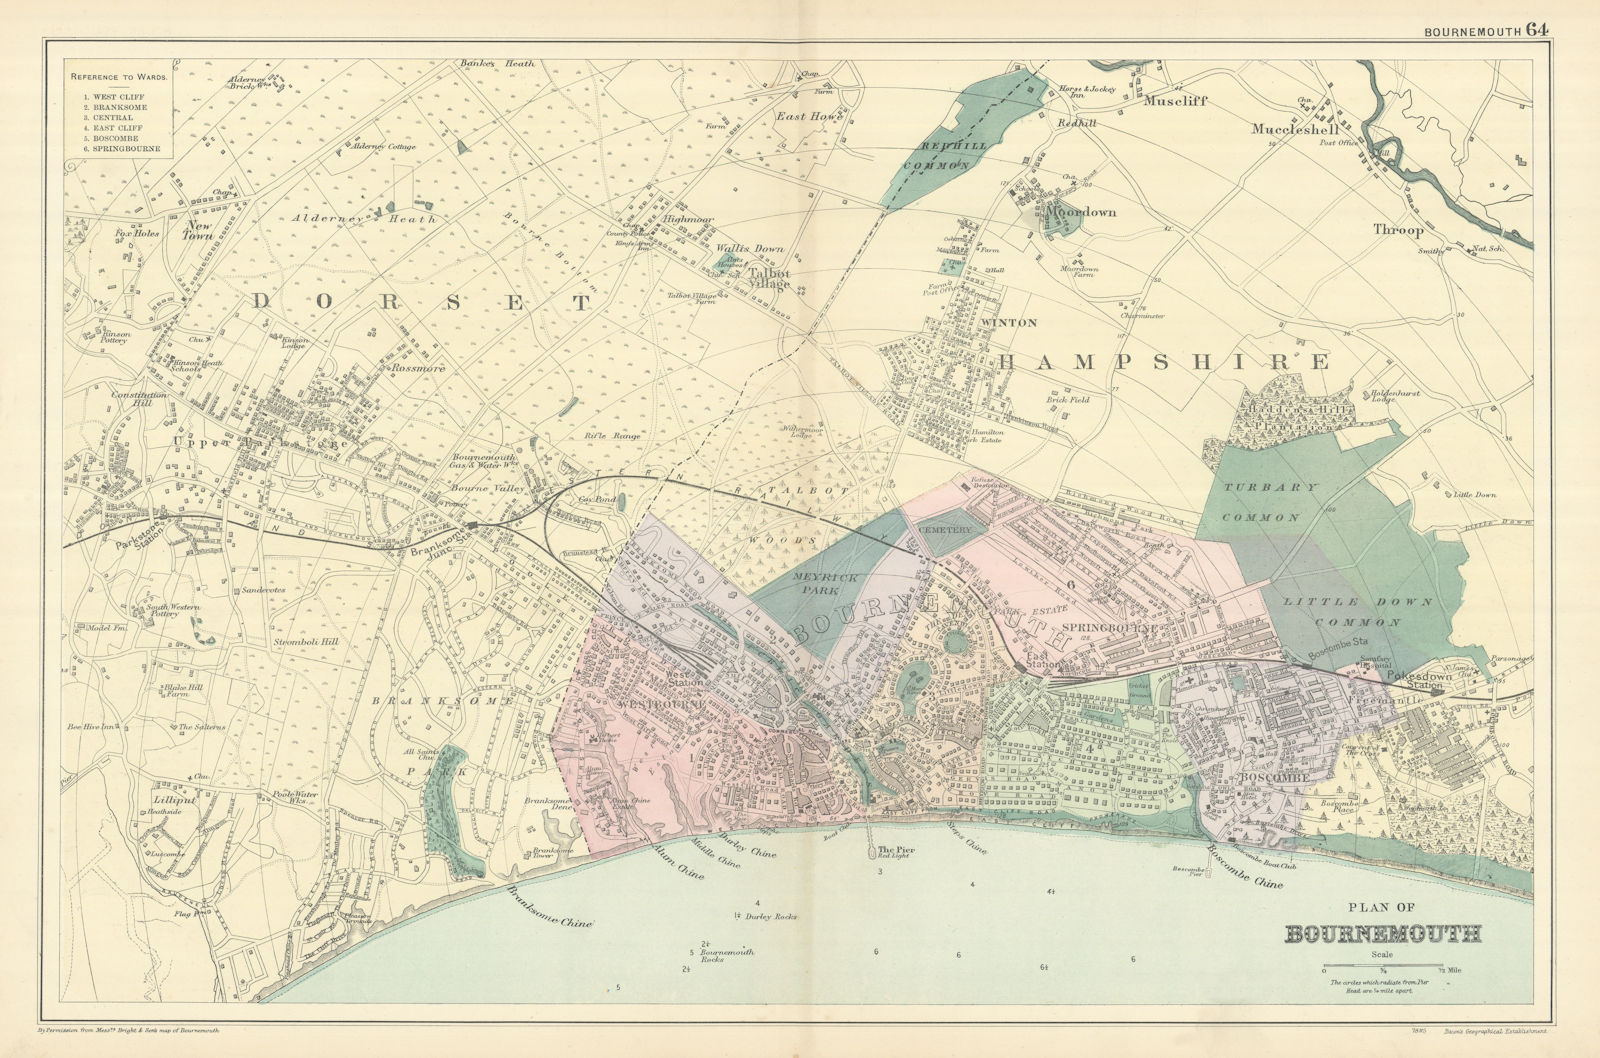 BOURNEMOUTH town city plan. Westbourne Springbourne Boscombe BACON 1898 map